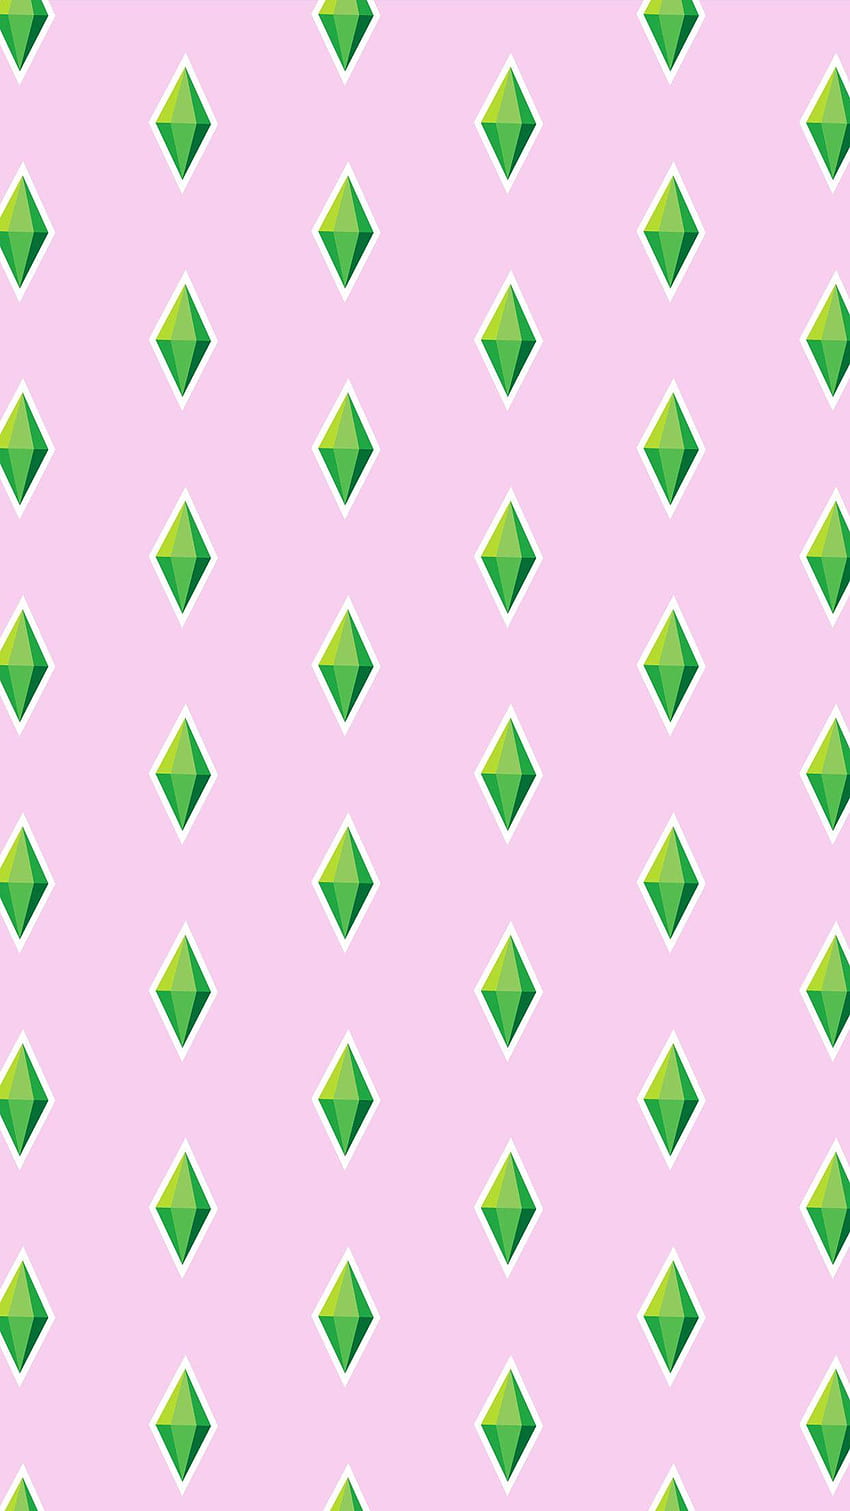 Express your very good mood with The Sims 4 Plumbob, sims mobile HD phone wallpaper